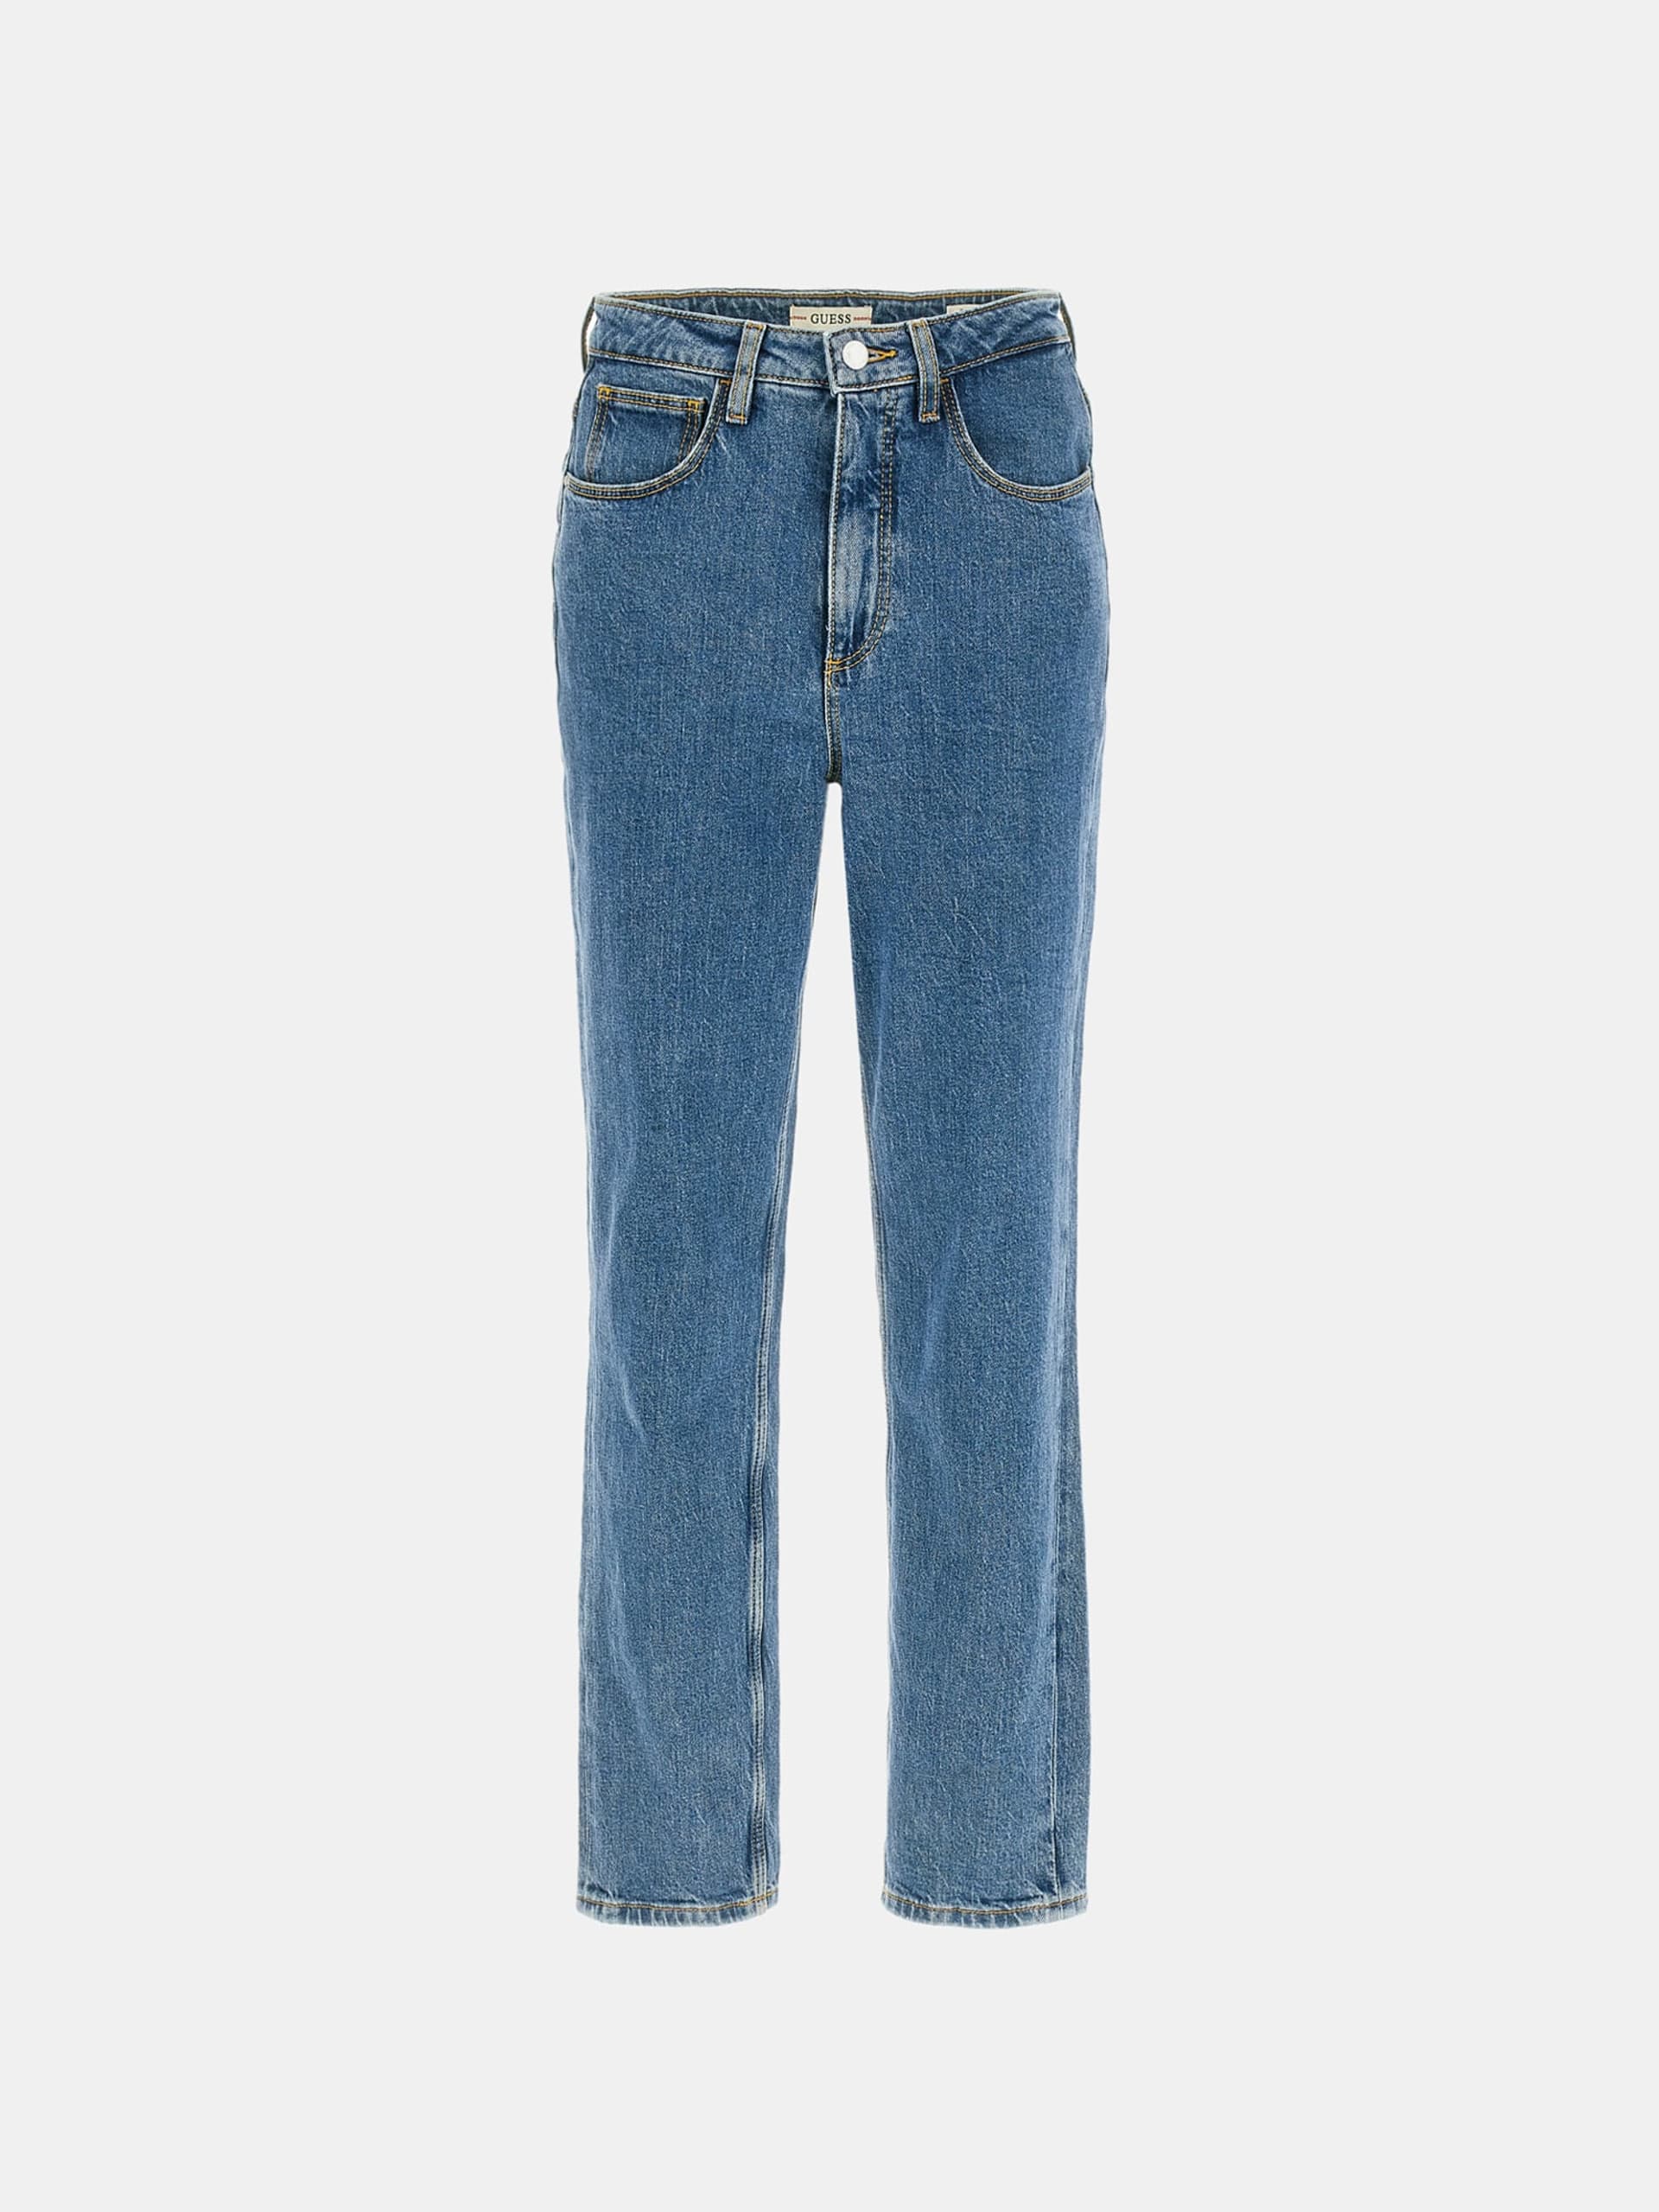 Guess High Rise Mom Jean | Authentic Mid 2